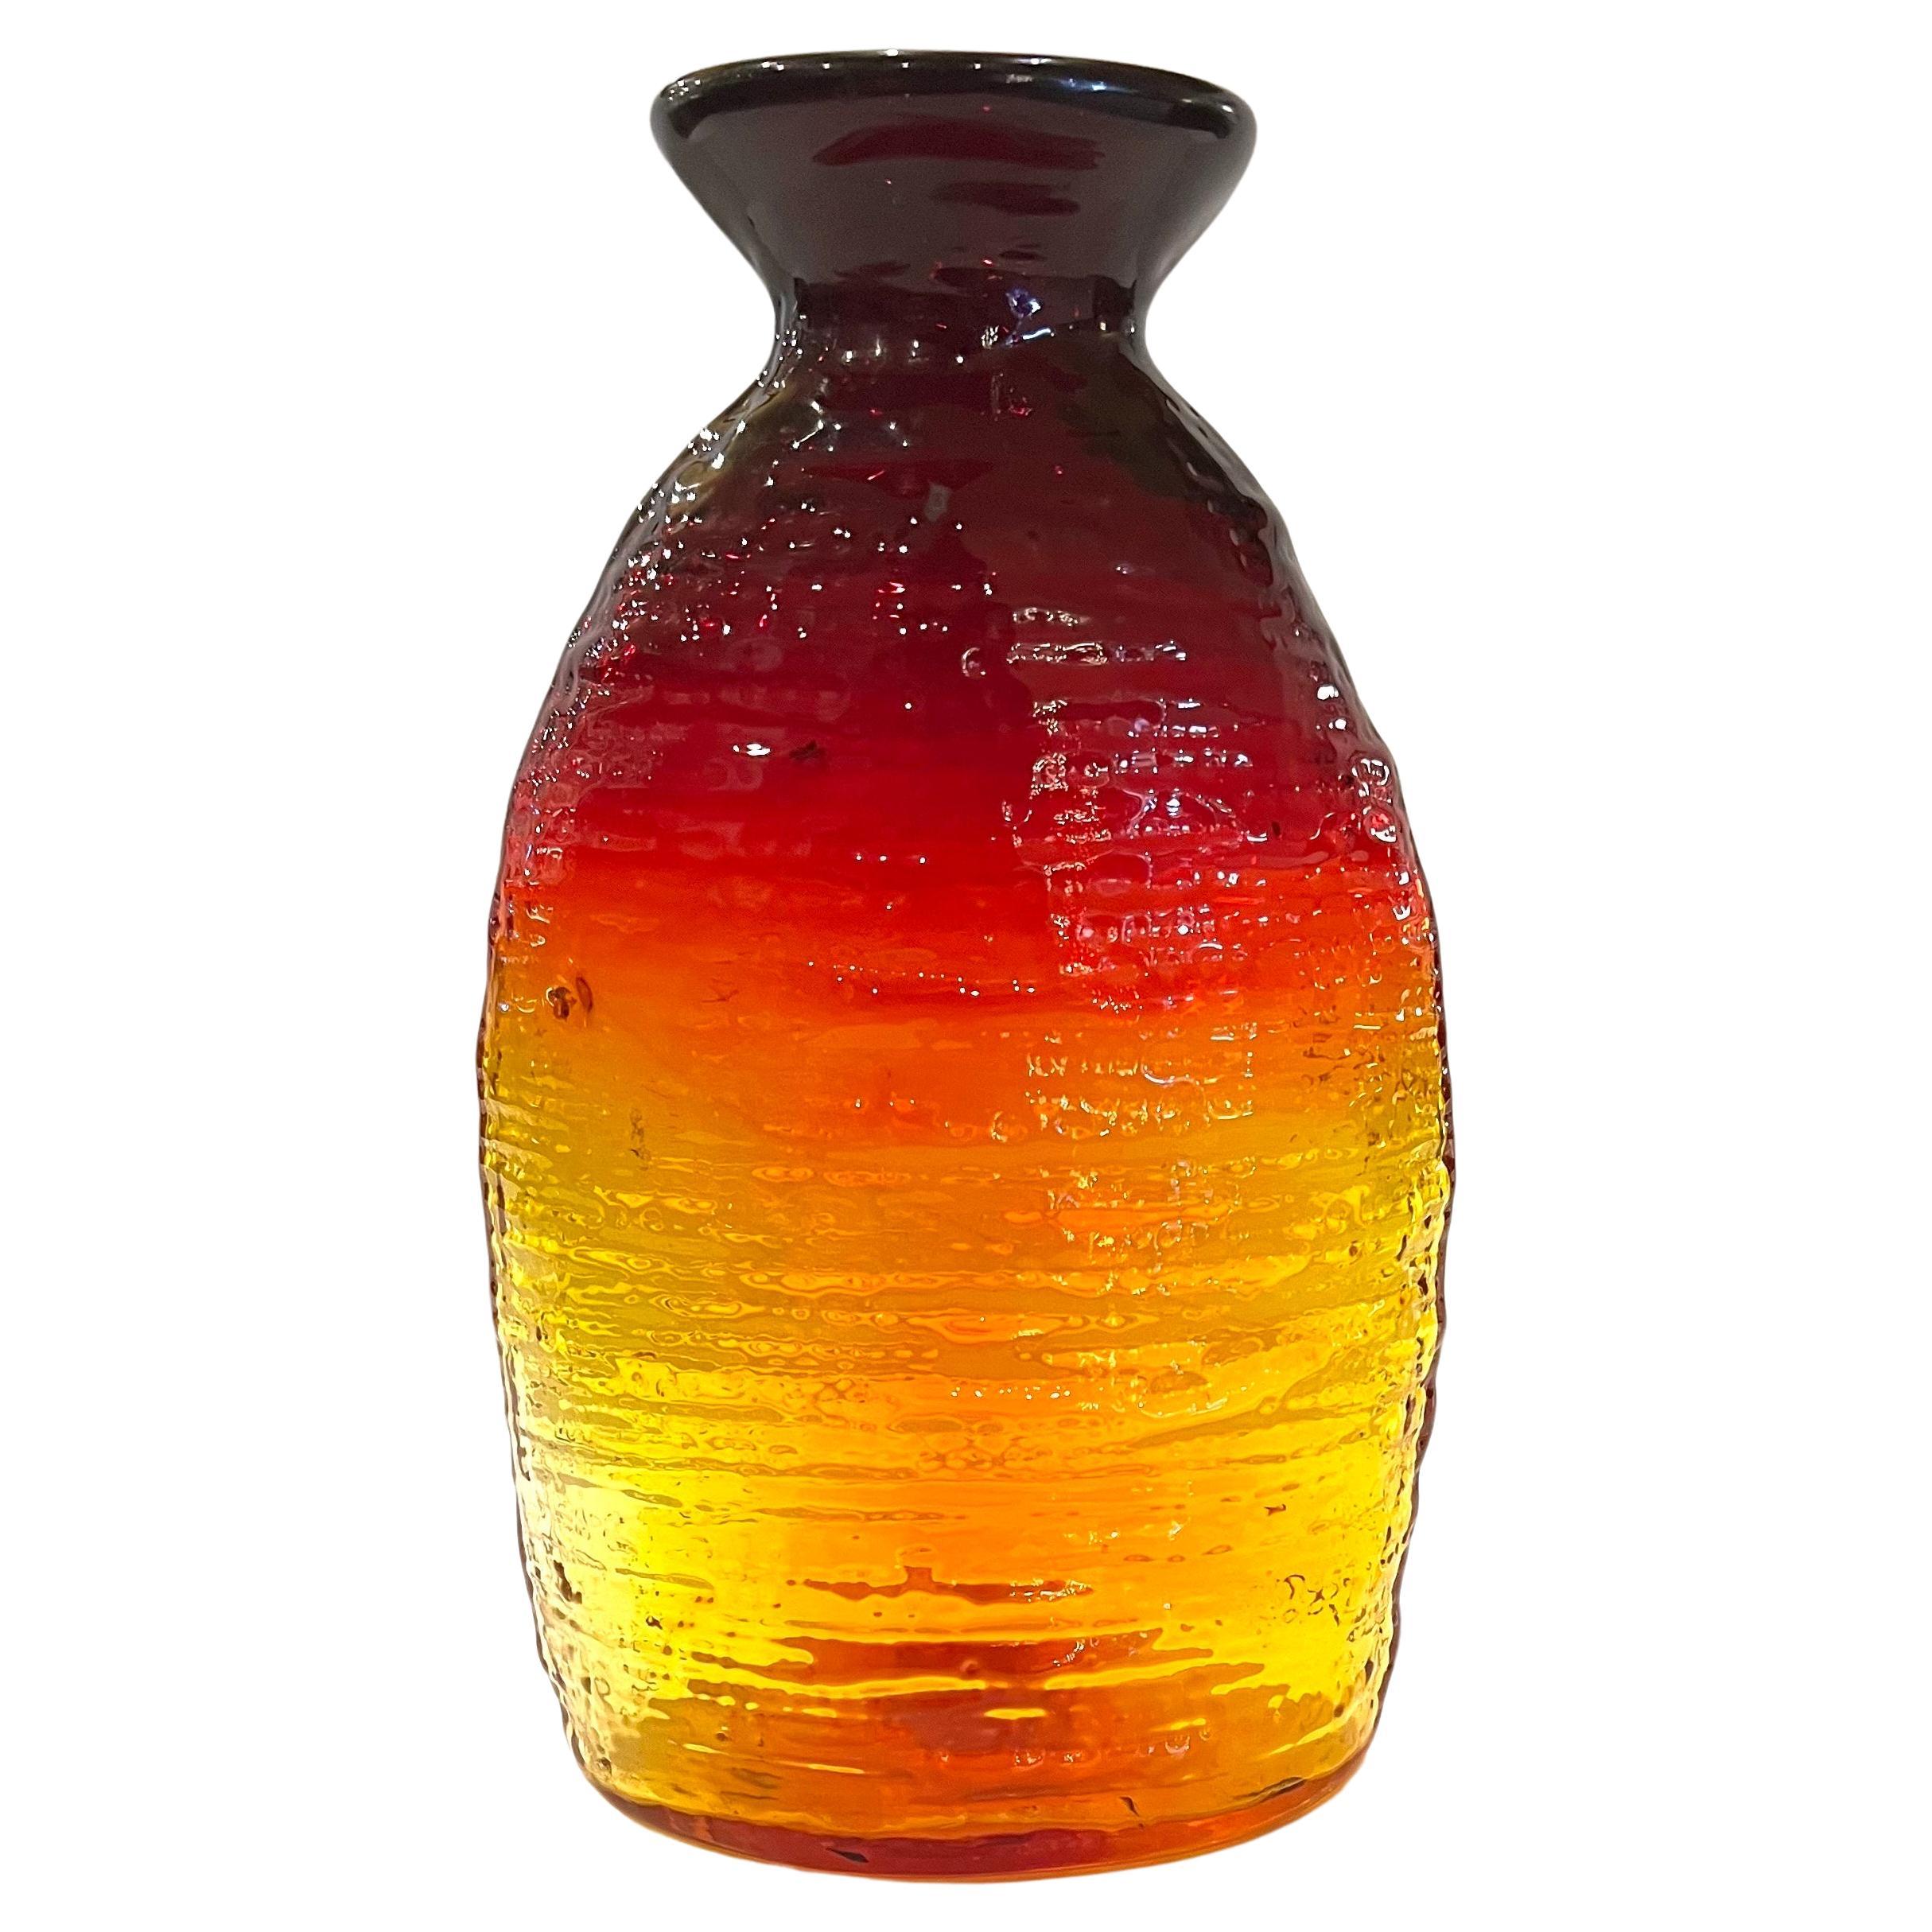  Collectible Amberina Glass 213SL Strata Vase by Blenko Signed and Dated 2005